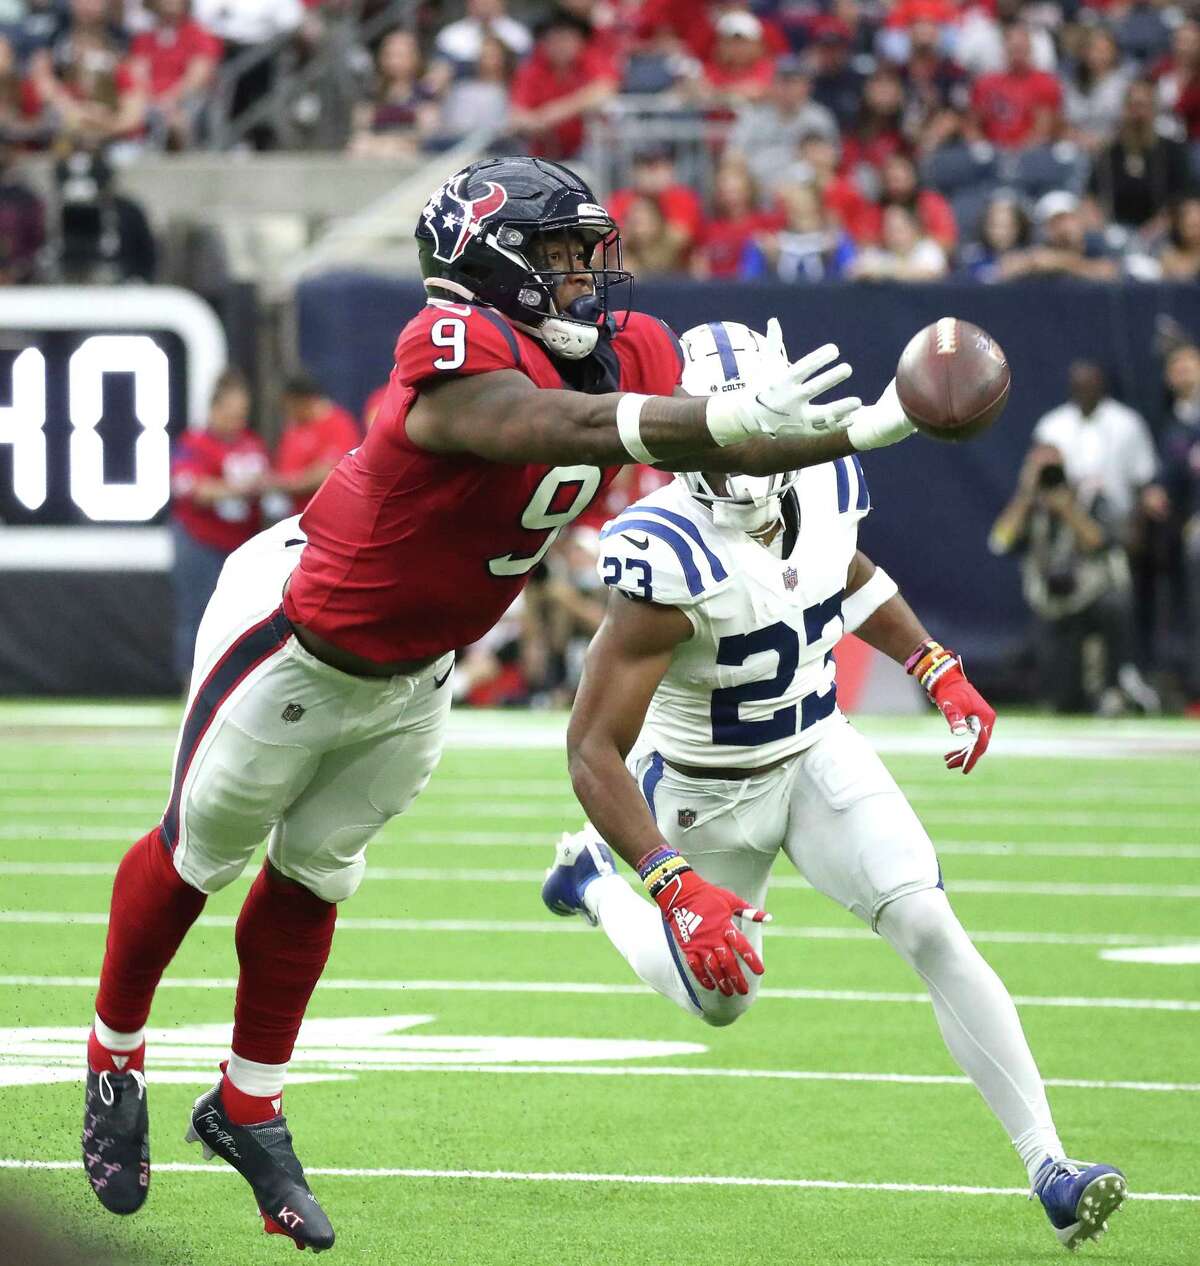 Houston Texans tight end Brevin Jordan (9) reaches out for a pass intended for him against Indianapolis Colts cornerback Kenny Moore II (23) during the first half of an NFL football game at NRG Stadium, Sunday, Dec. 5, 2021 in Houston.